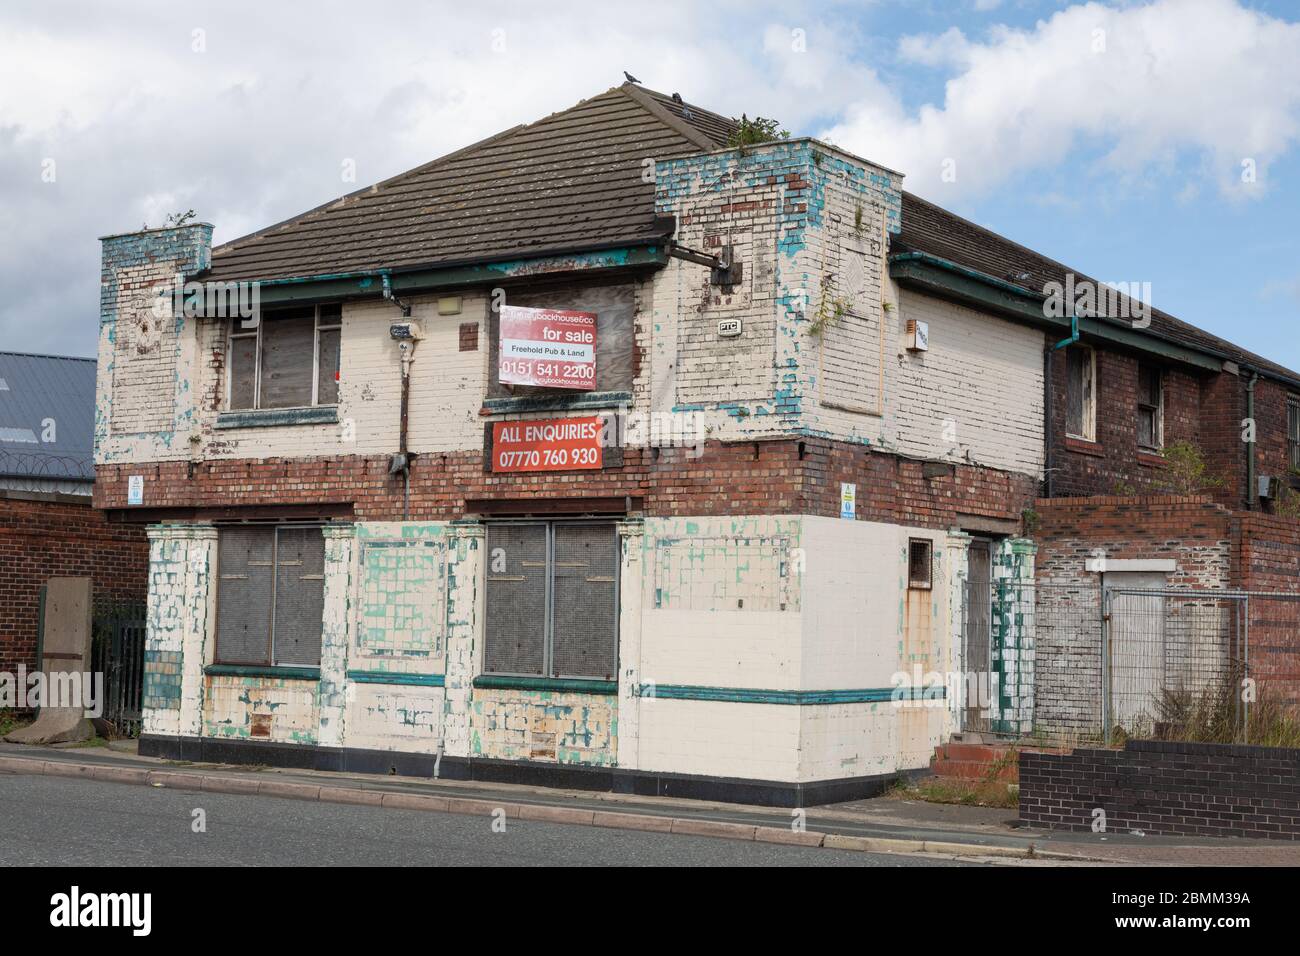 Derelict former pub building for sale in Wallasey Wirral August 2019 Stock Photo